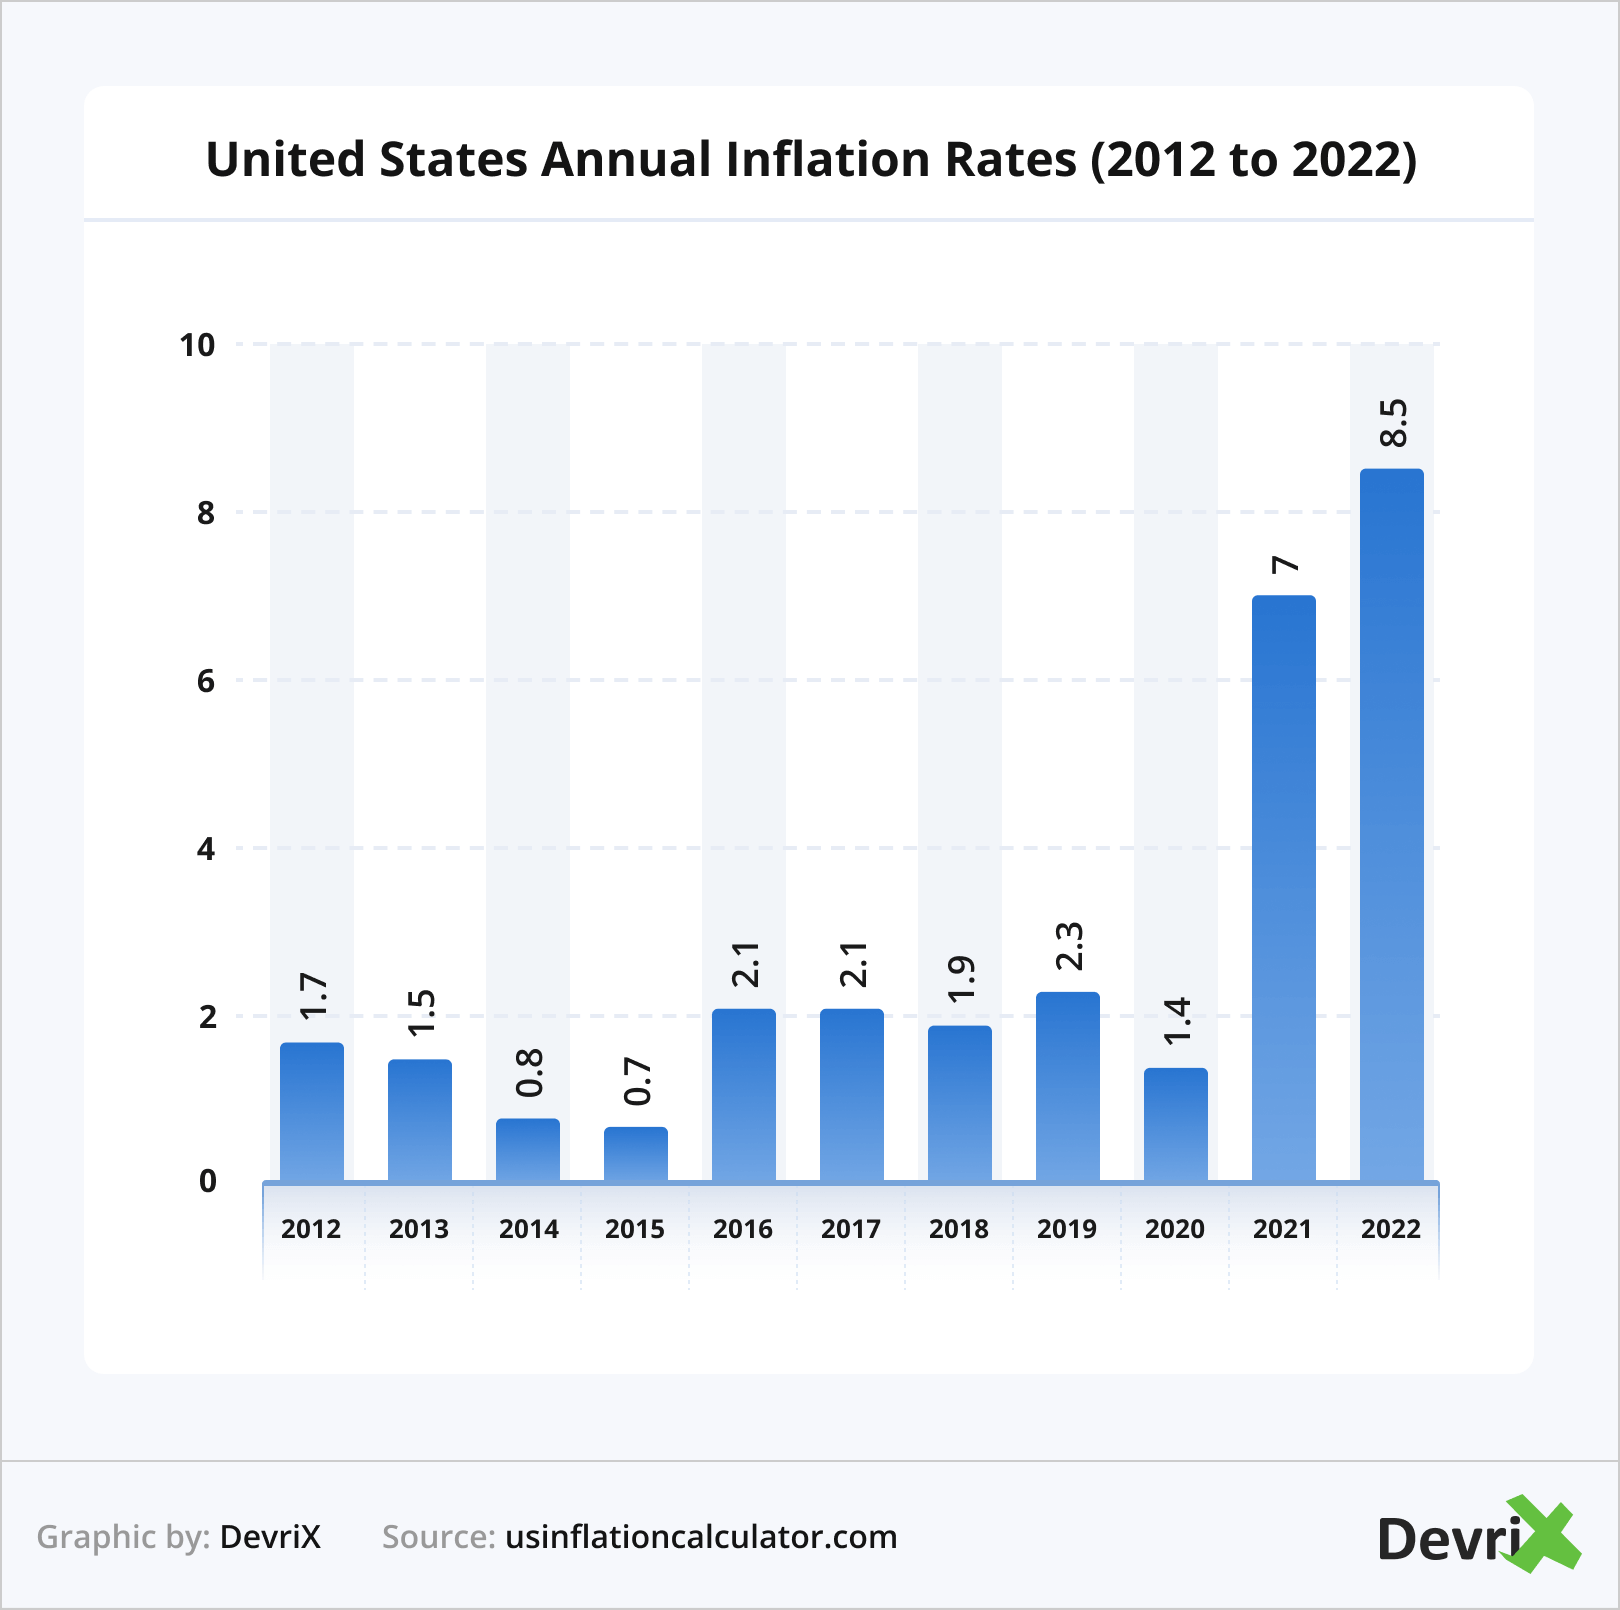 United States Annual Inflation Rates (2012 to 2022)